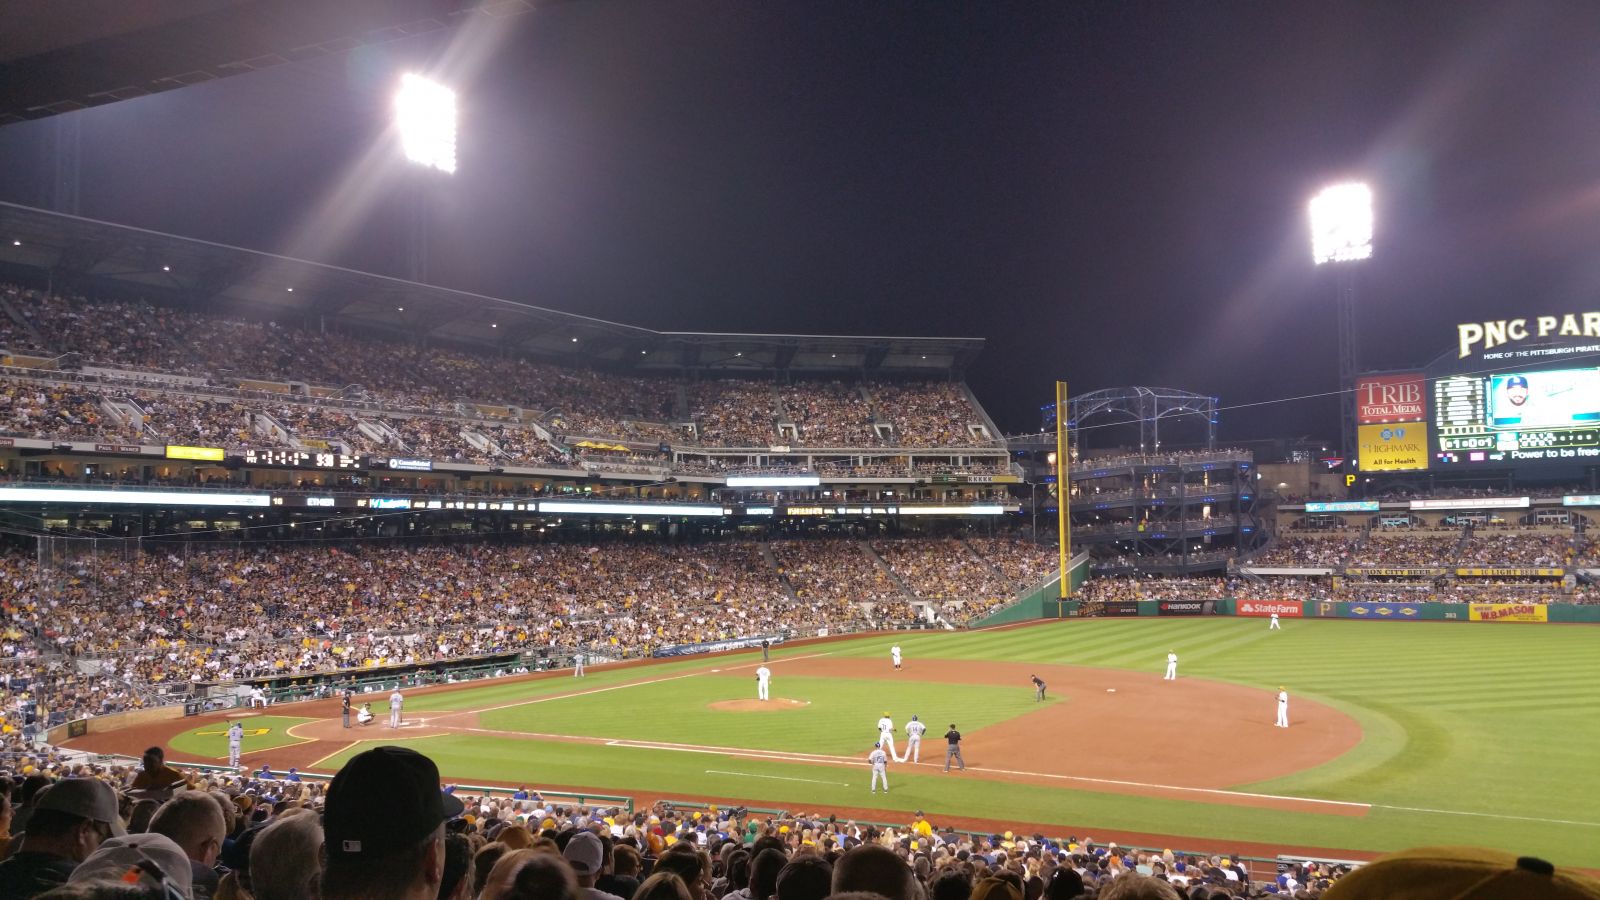 section 108, row dd seat view  - pnc park